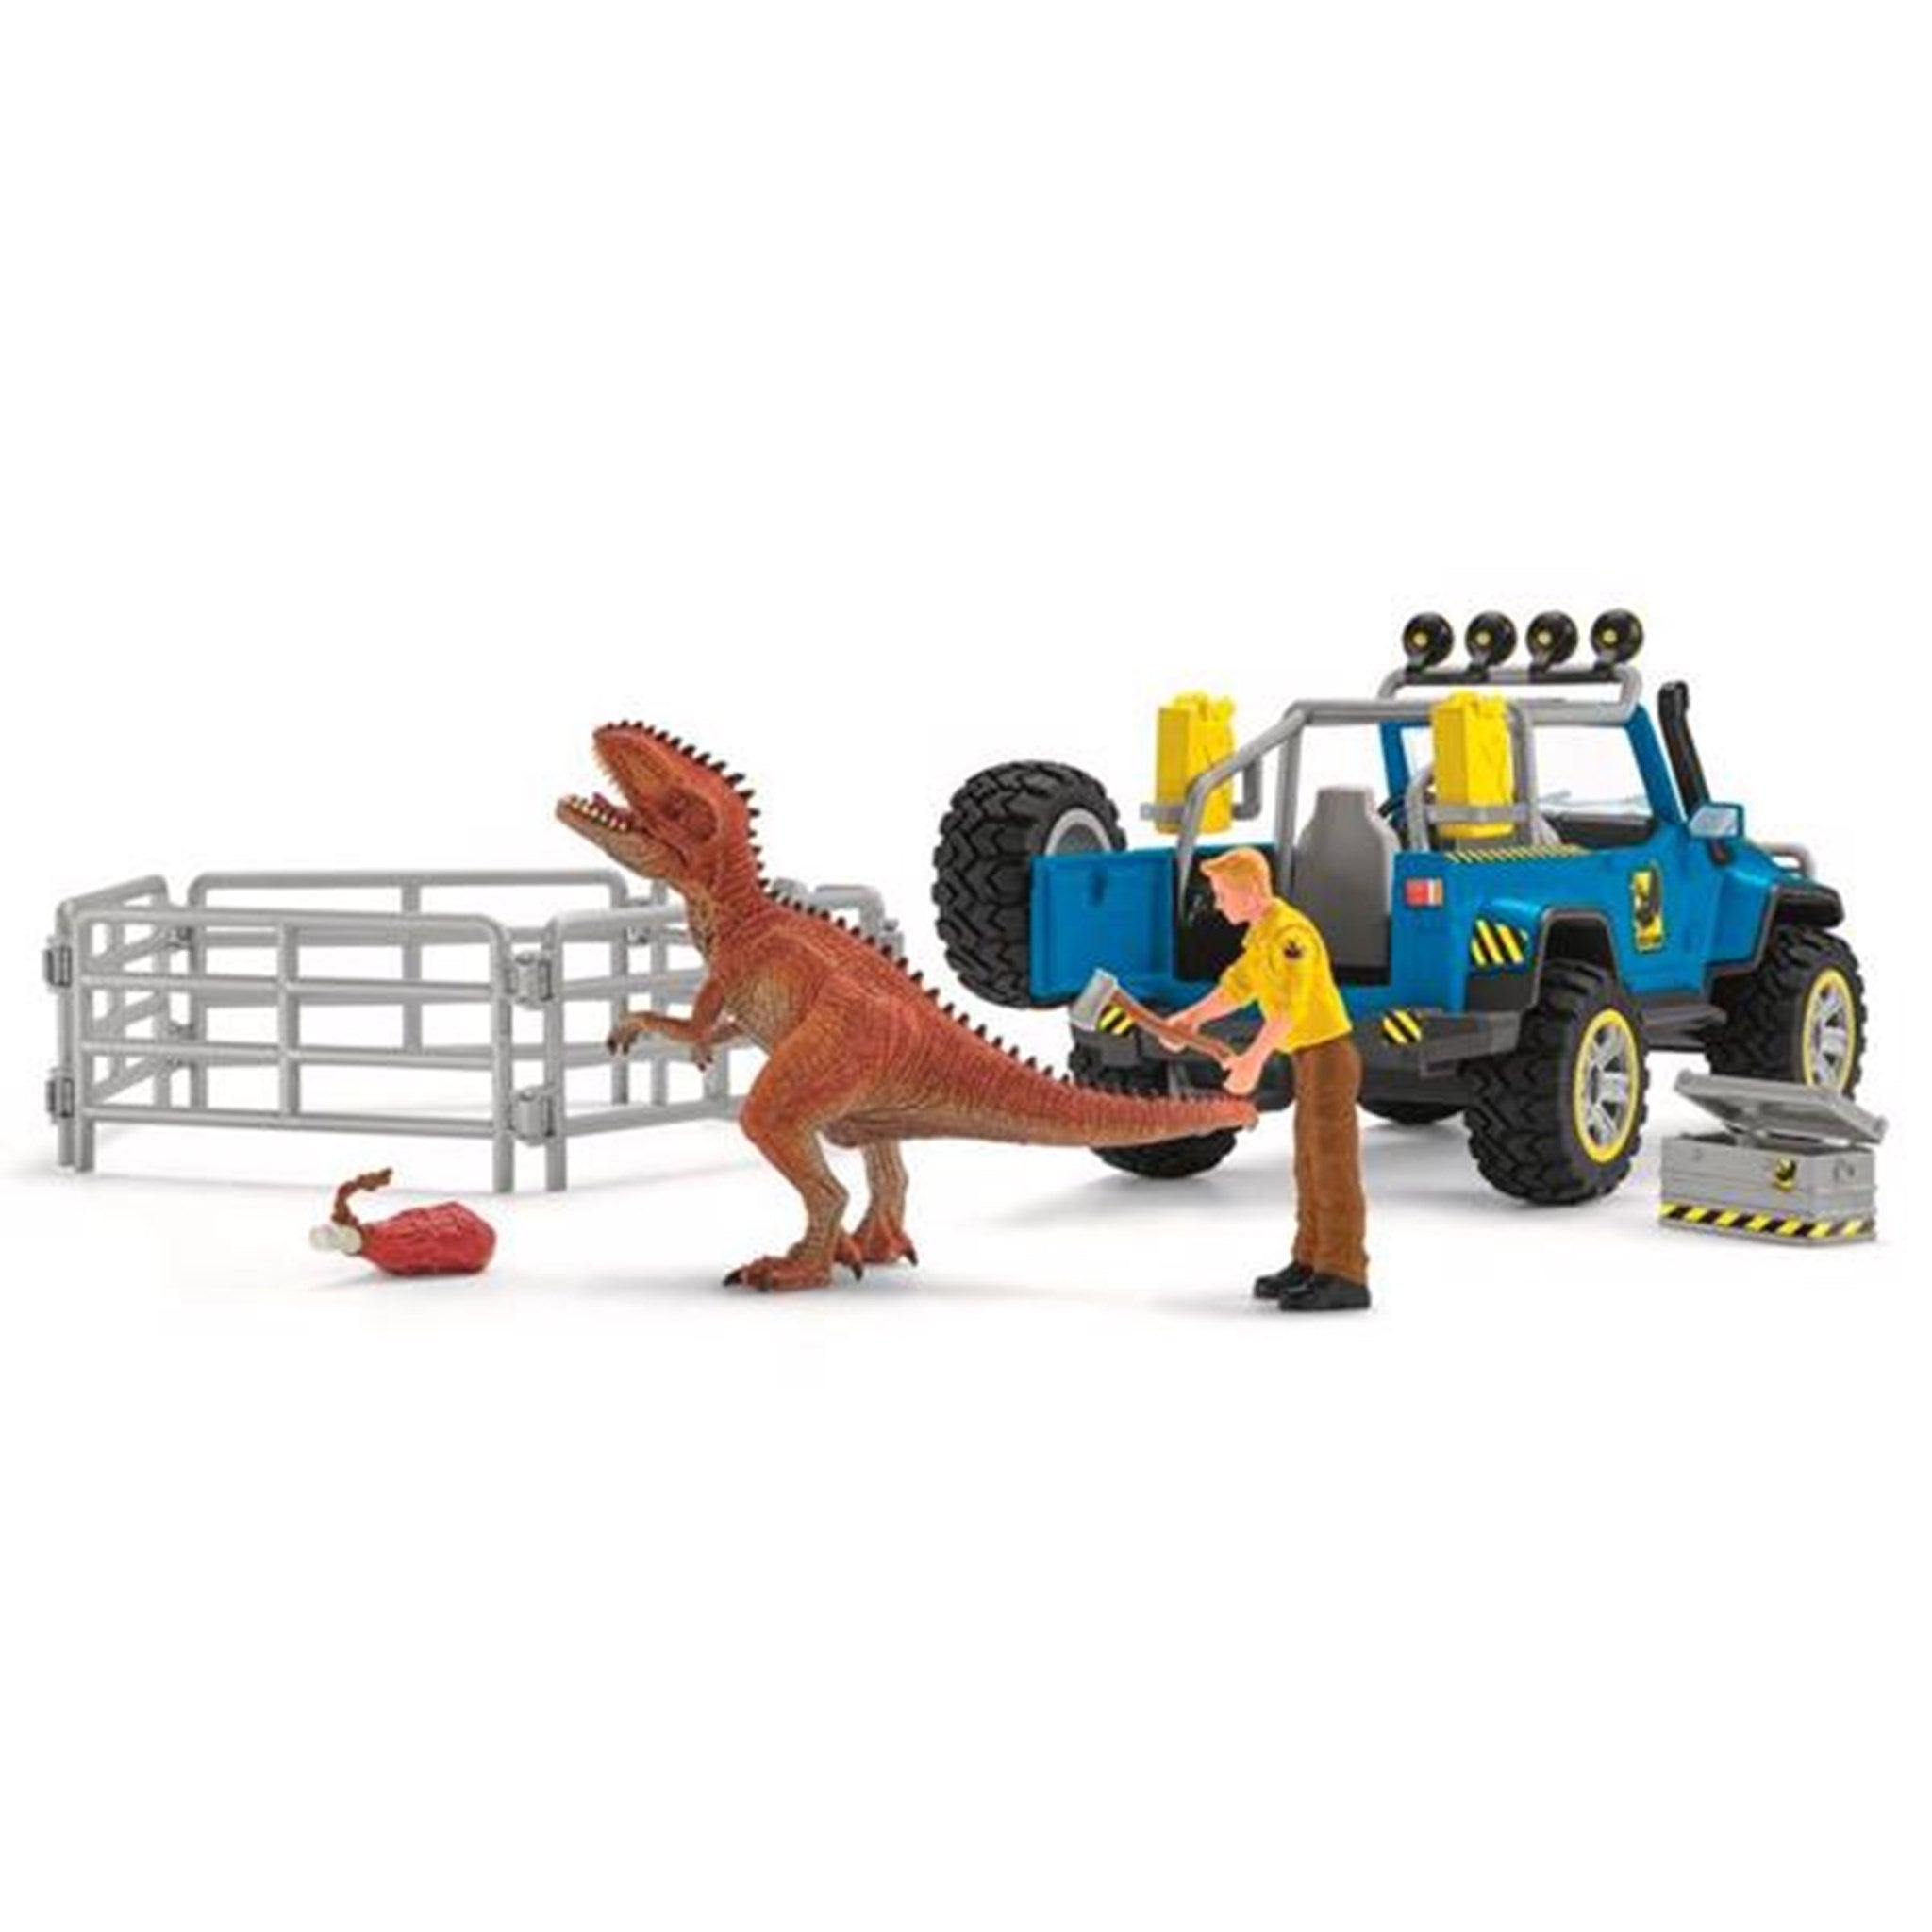 Schleich Dinosaurs Off-Road Vehicle w. Dino Outpost 4